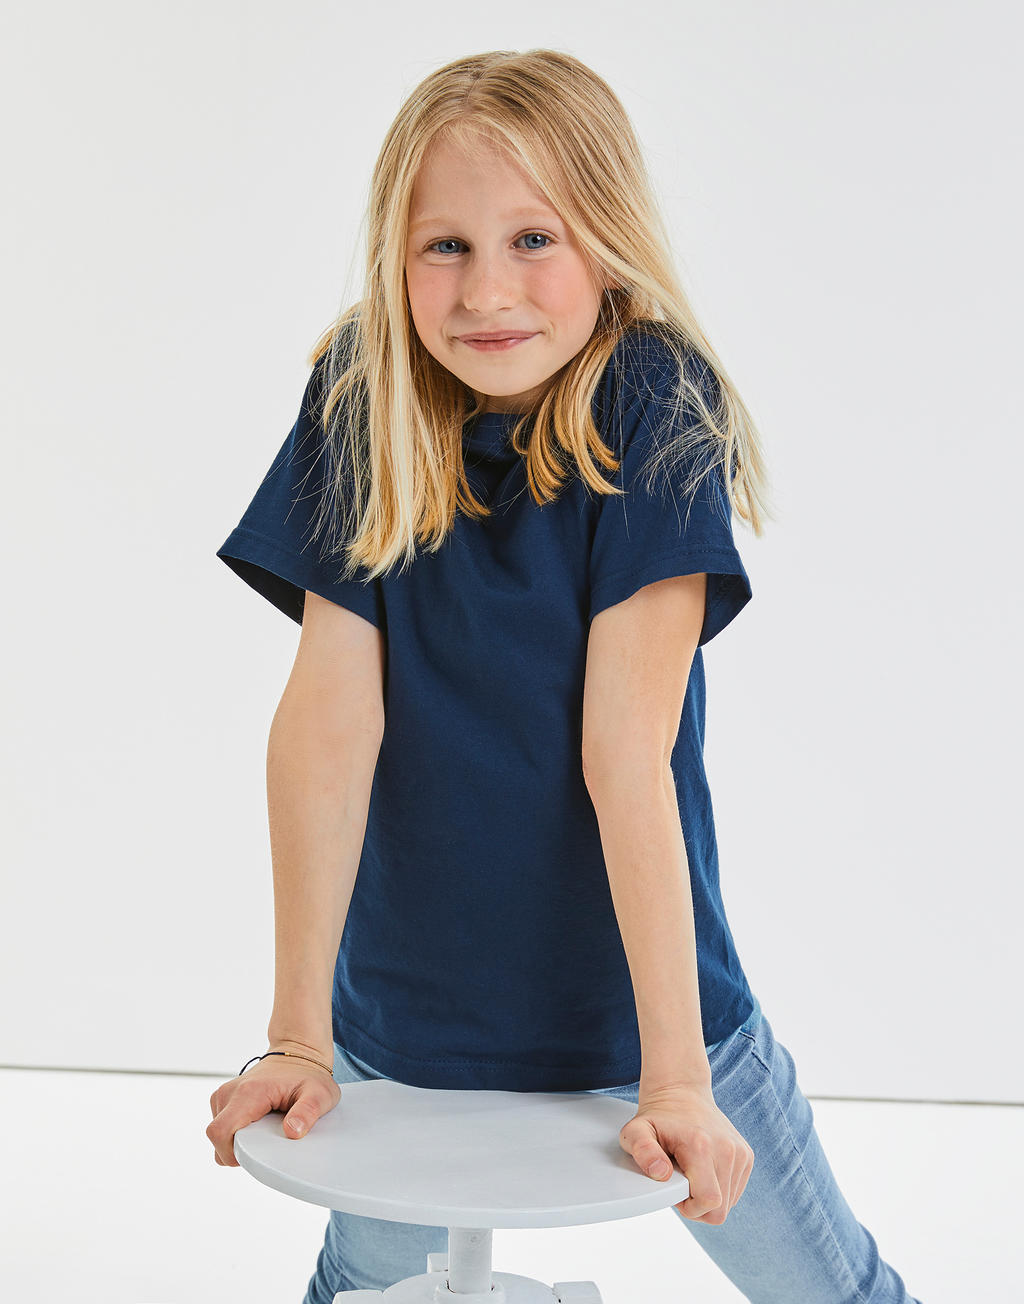  Kids Classic T-Shirt in Farbe White